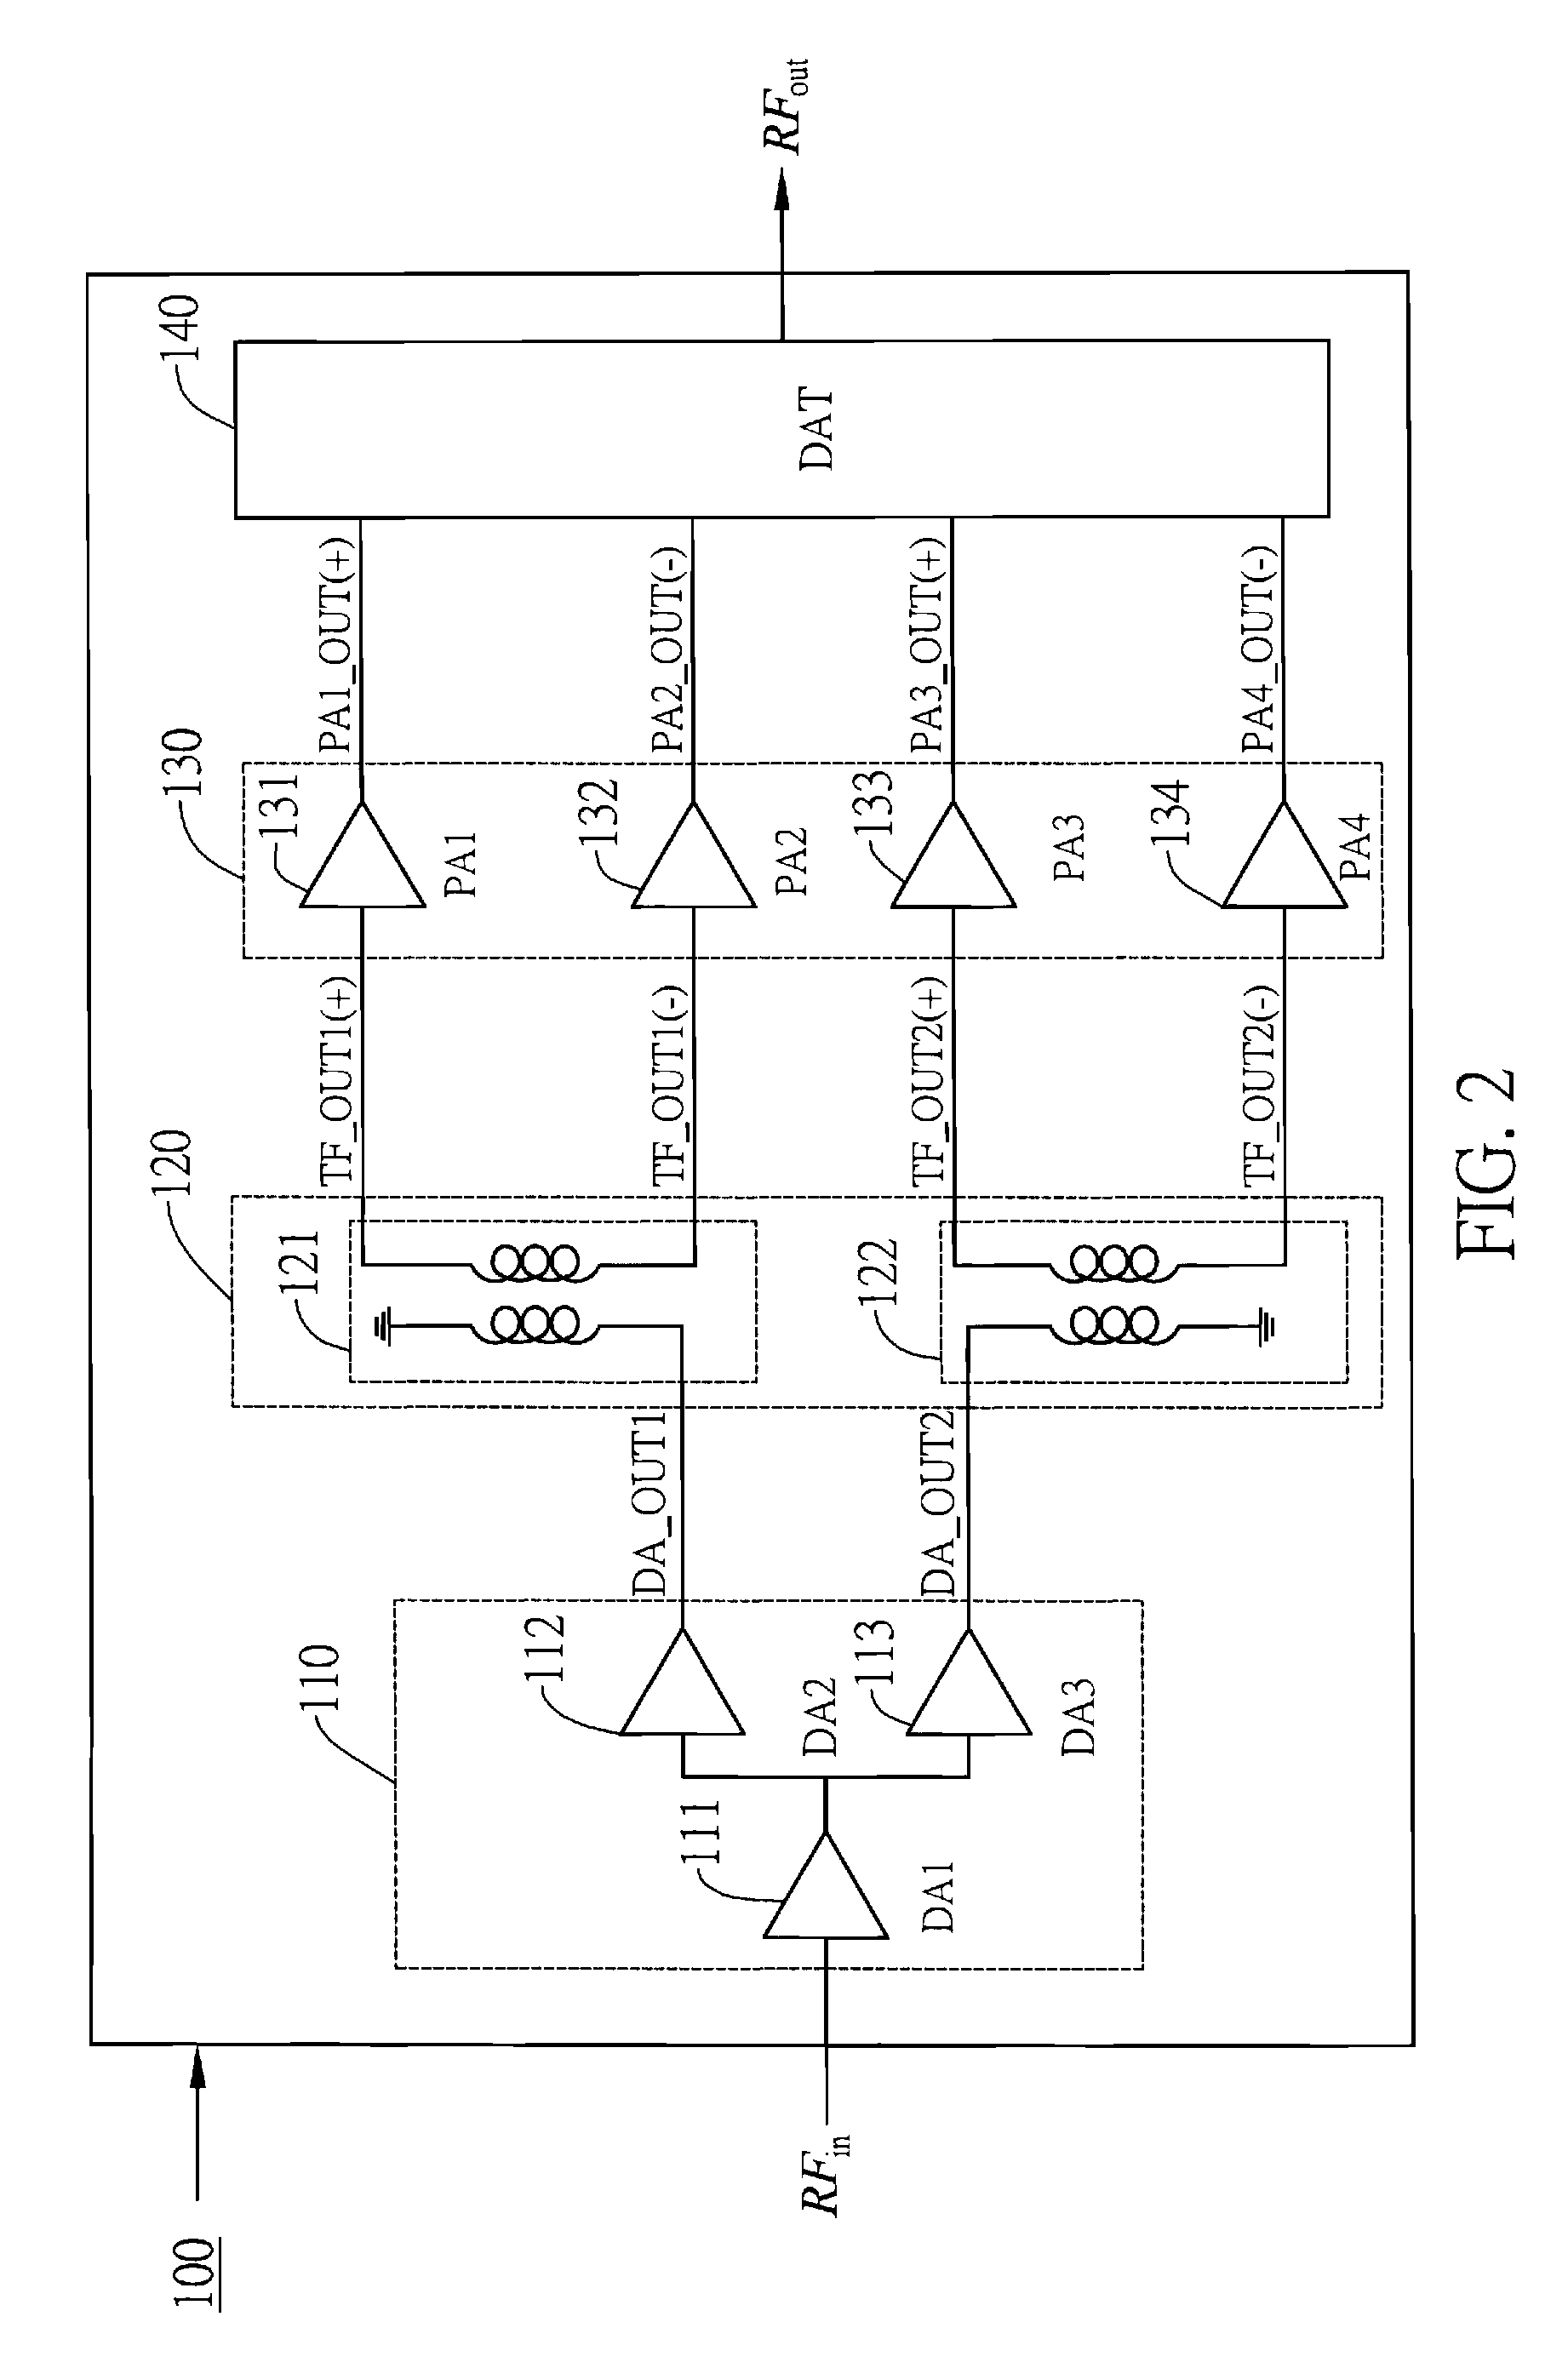 Distributed active transformer based millimeter-wave power amplifier circuit